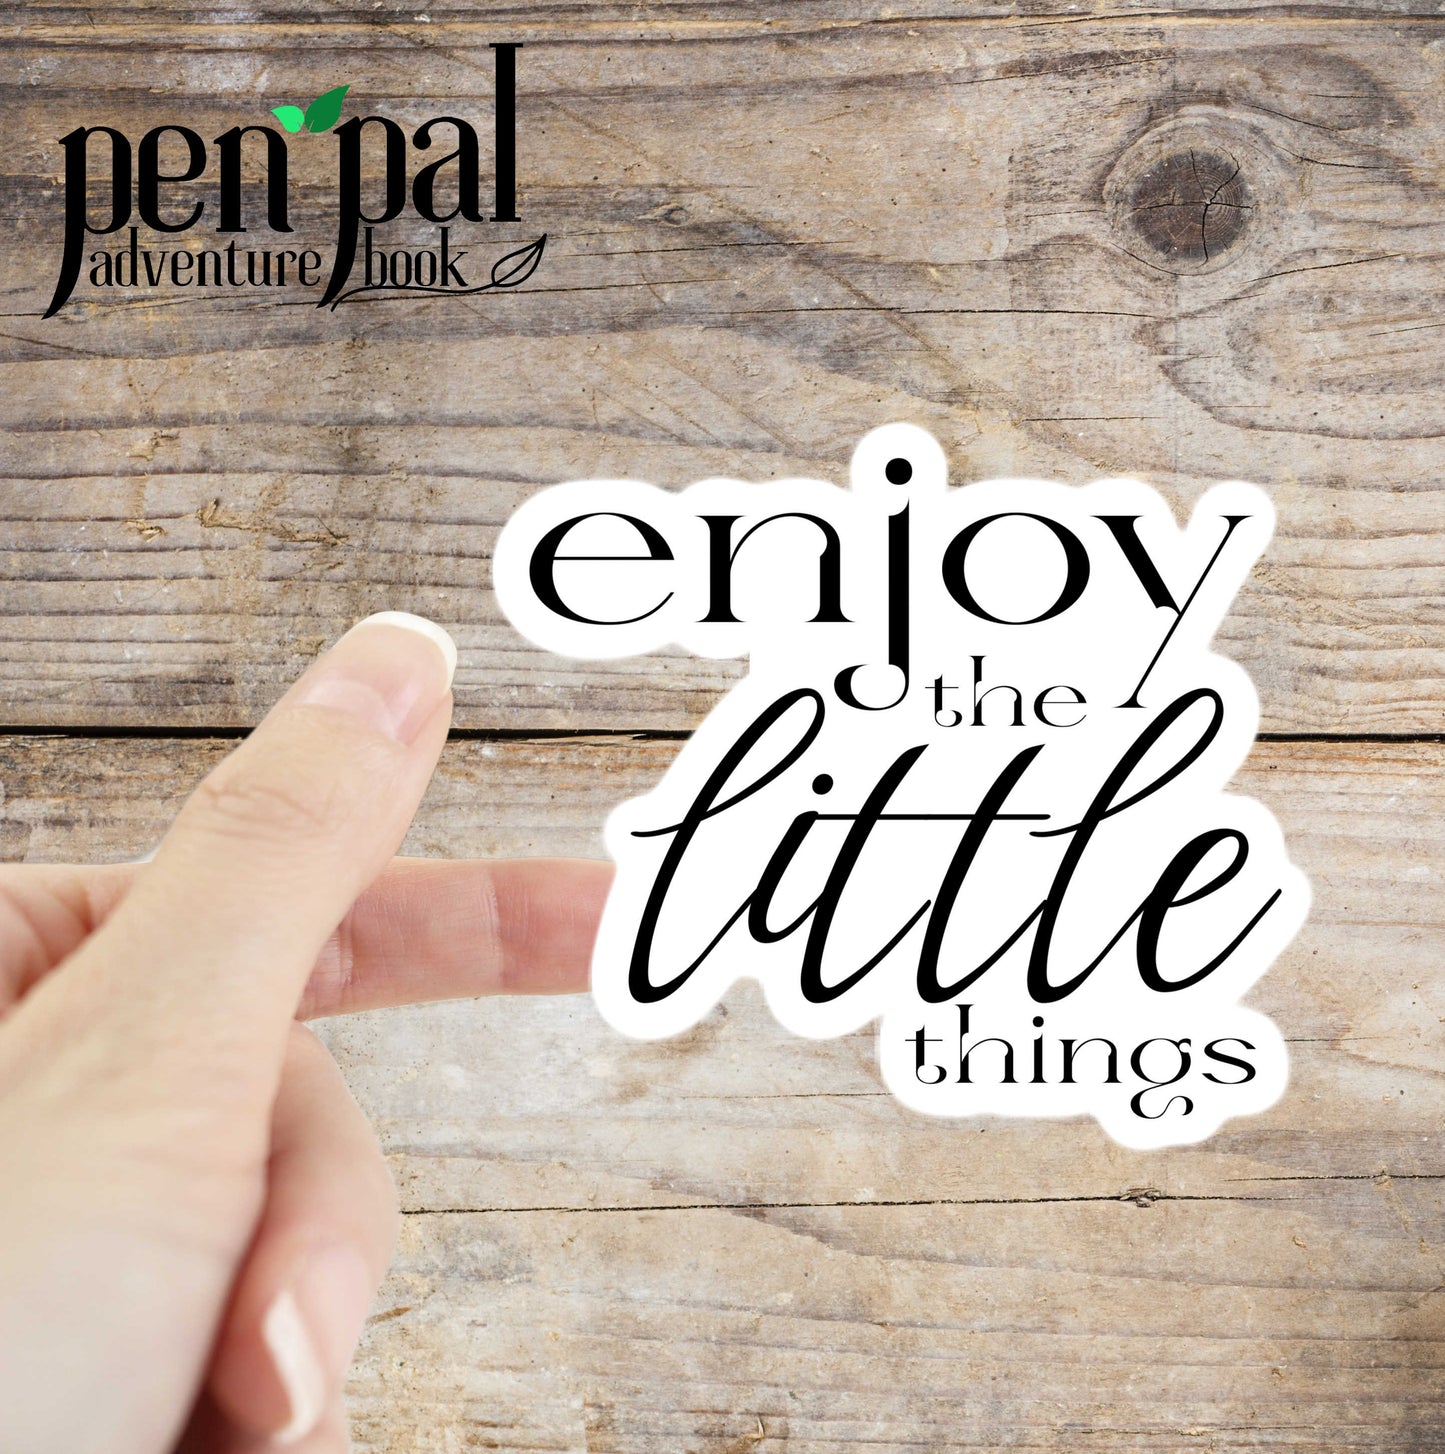 Instant Download-Enjoy the Little Birdie Things Journal Layout-Pen Pal Adventure Book Coordinating Printables